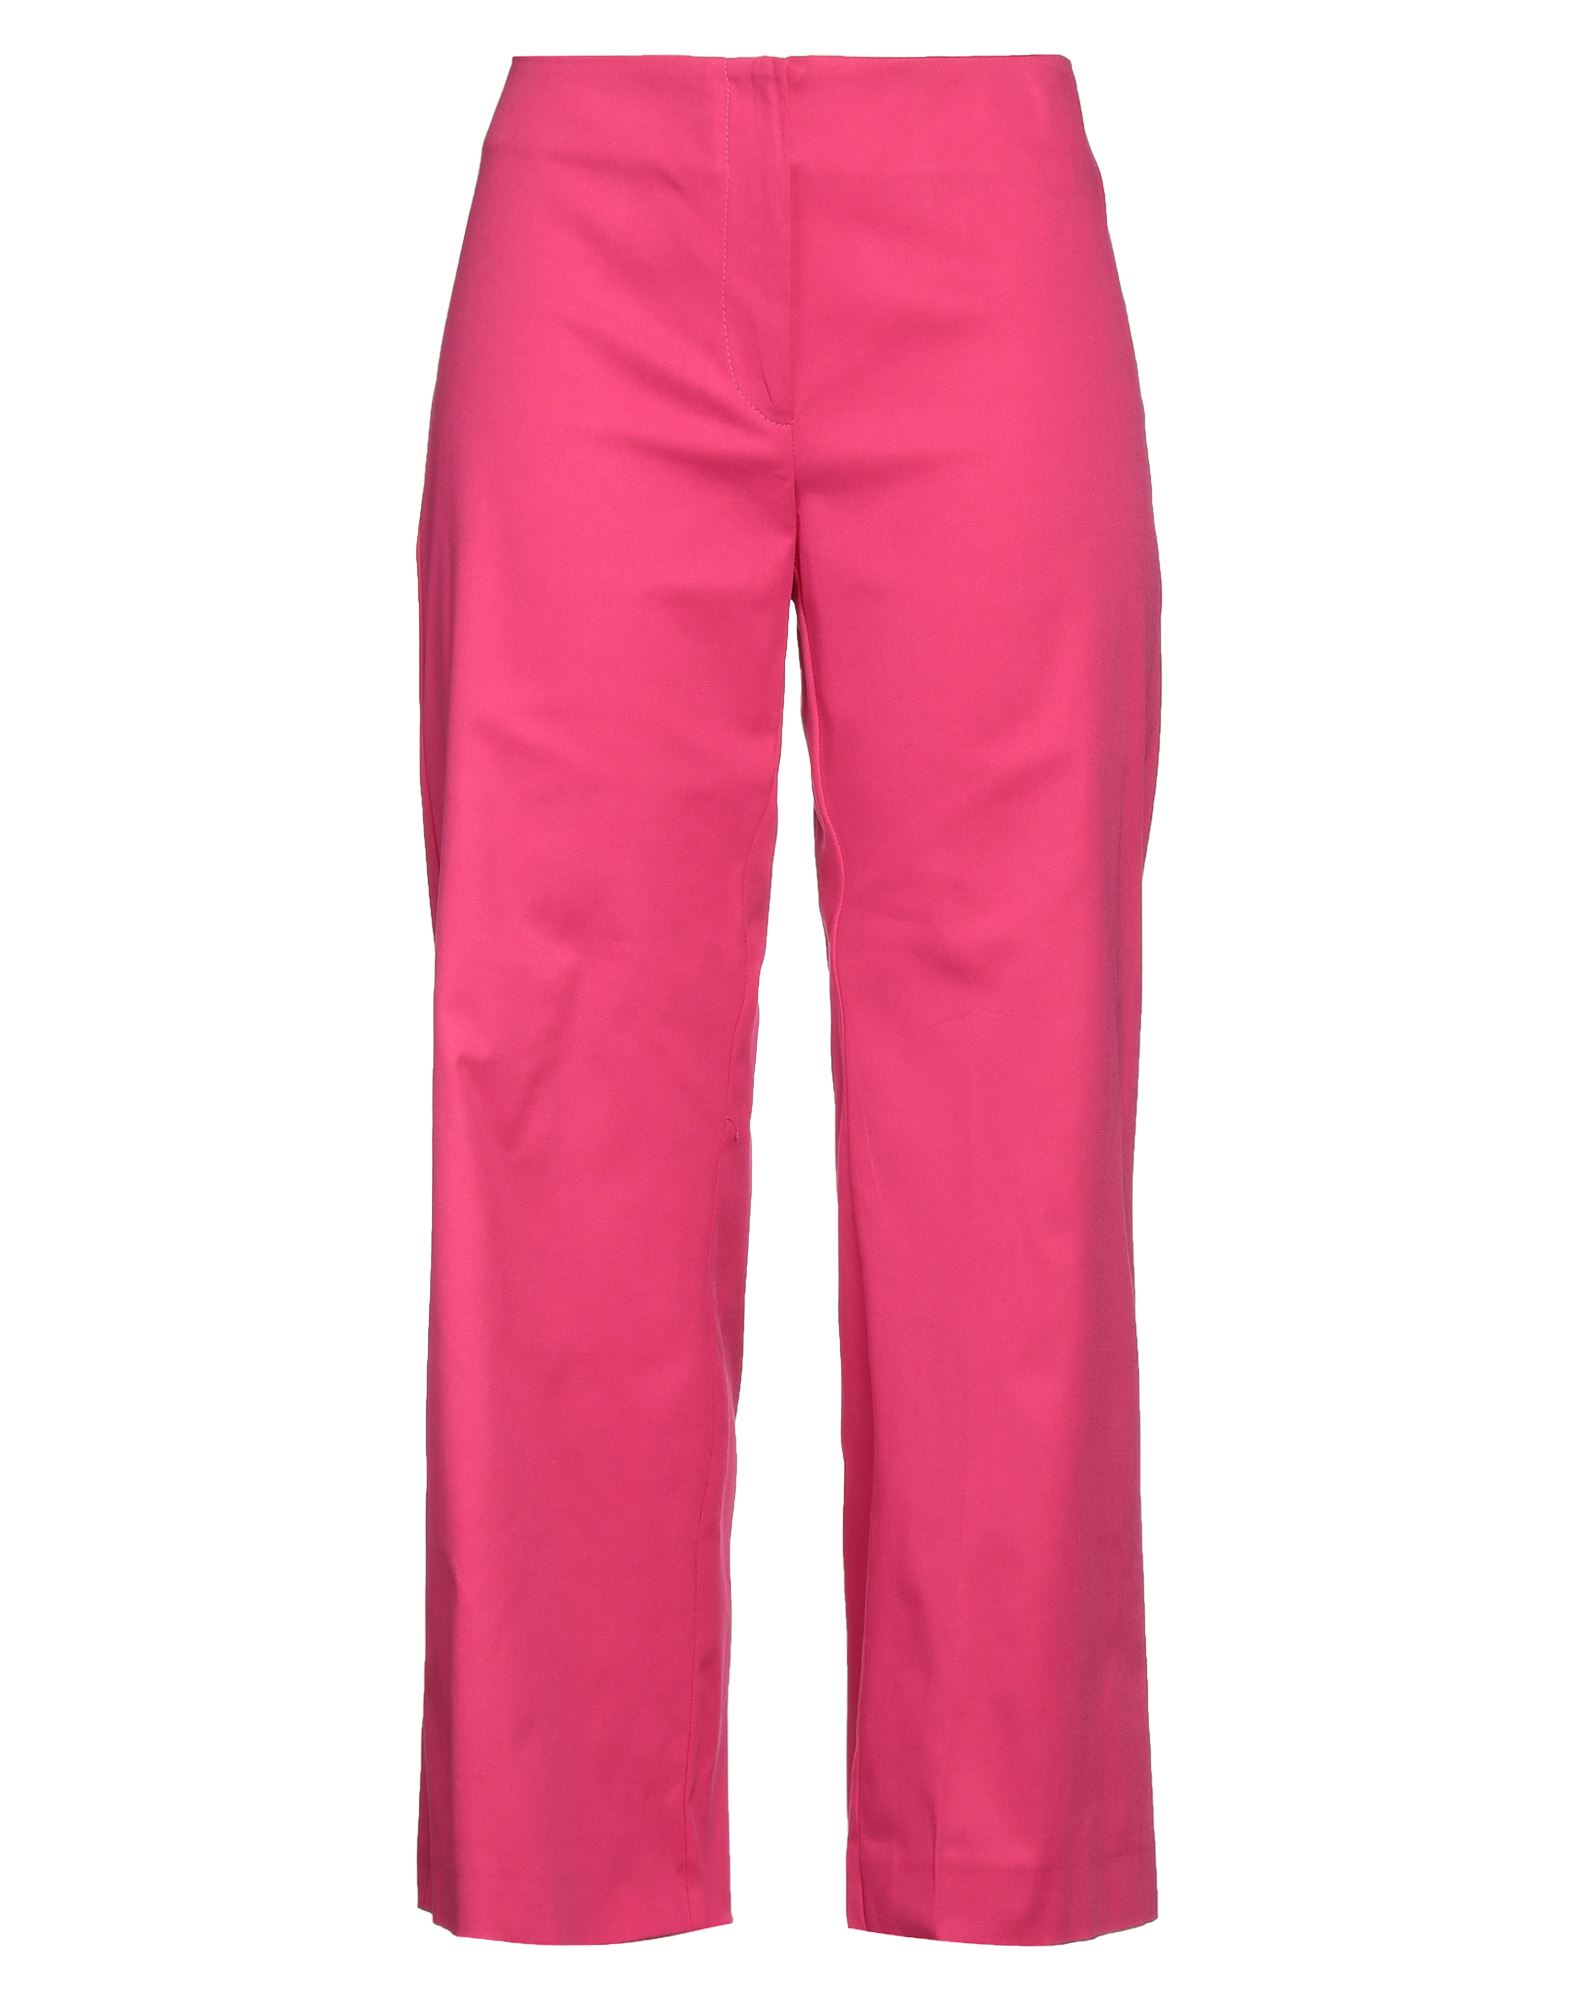 Millenovecentosettantotto Pants In Pink